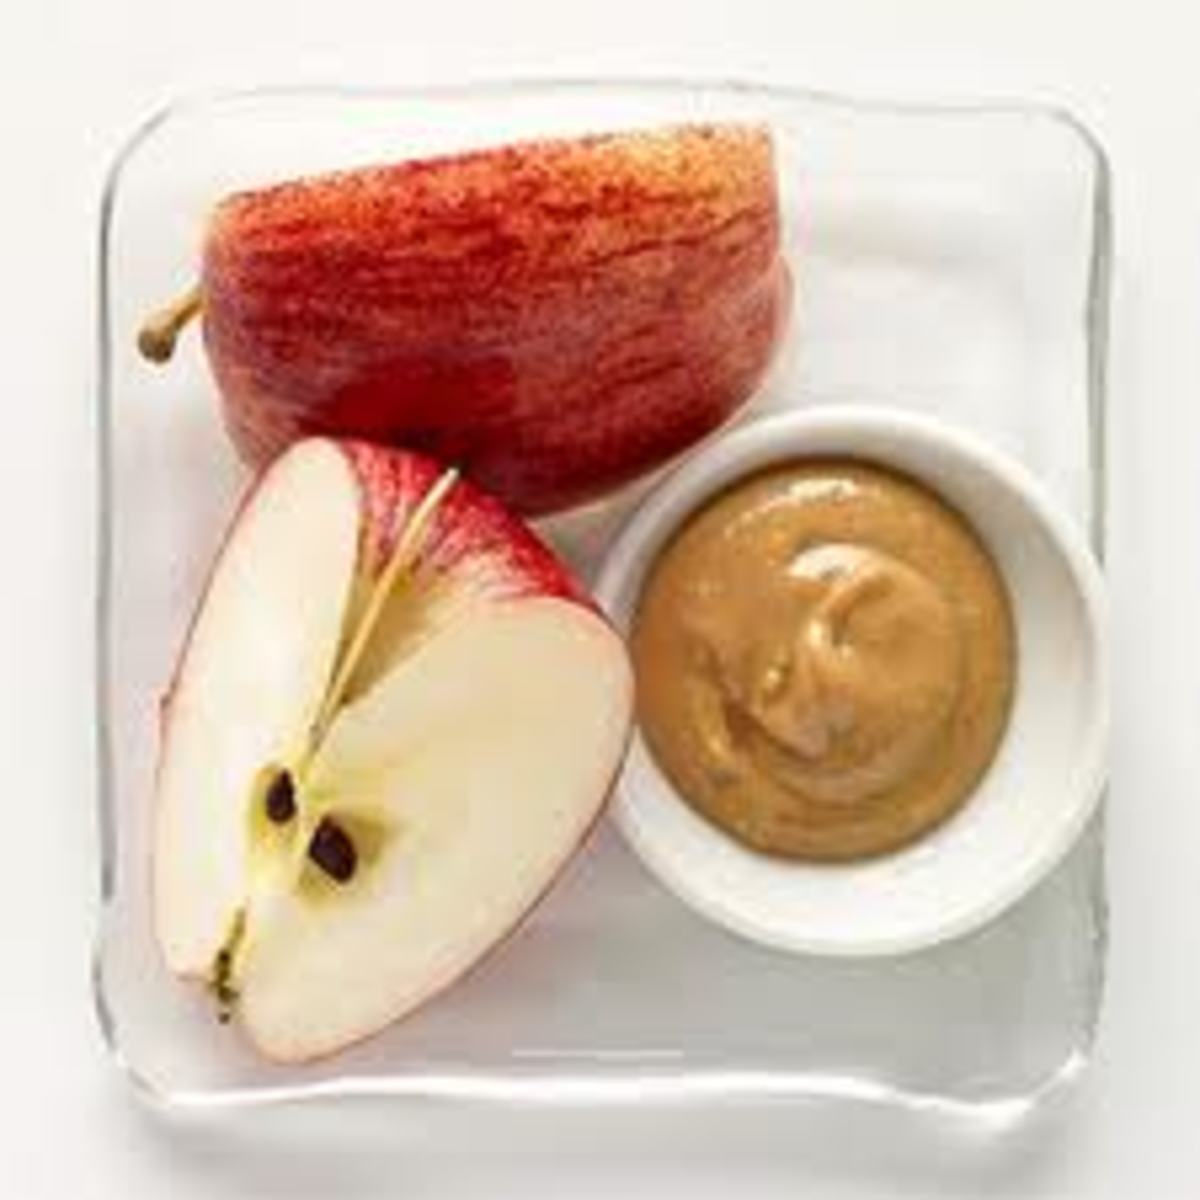 Apples with Peanut Butter. Inexpensive, cheap picnic menu.